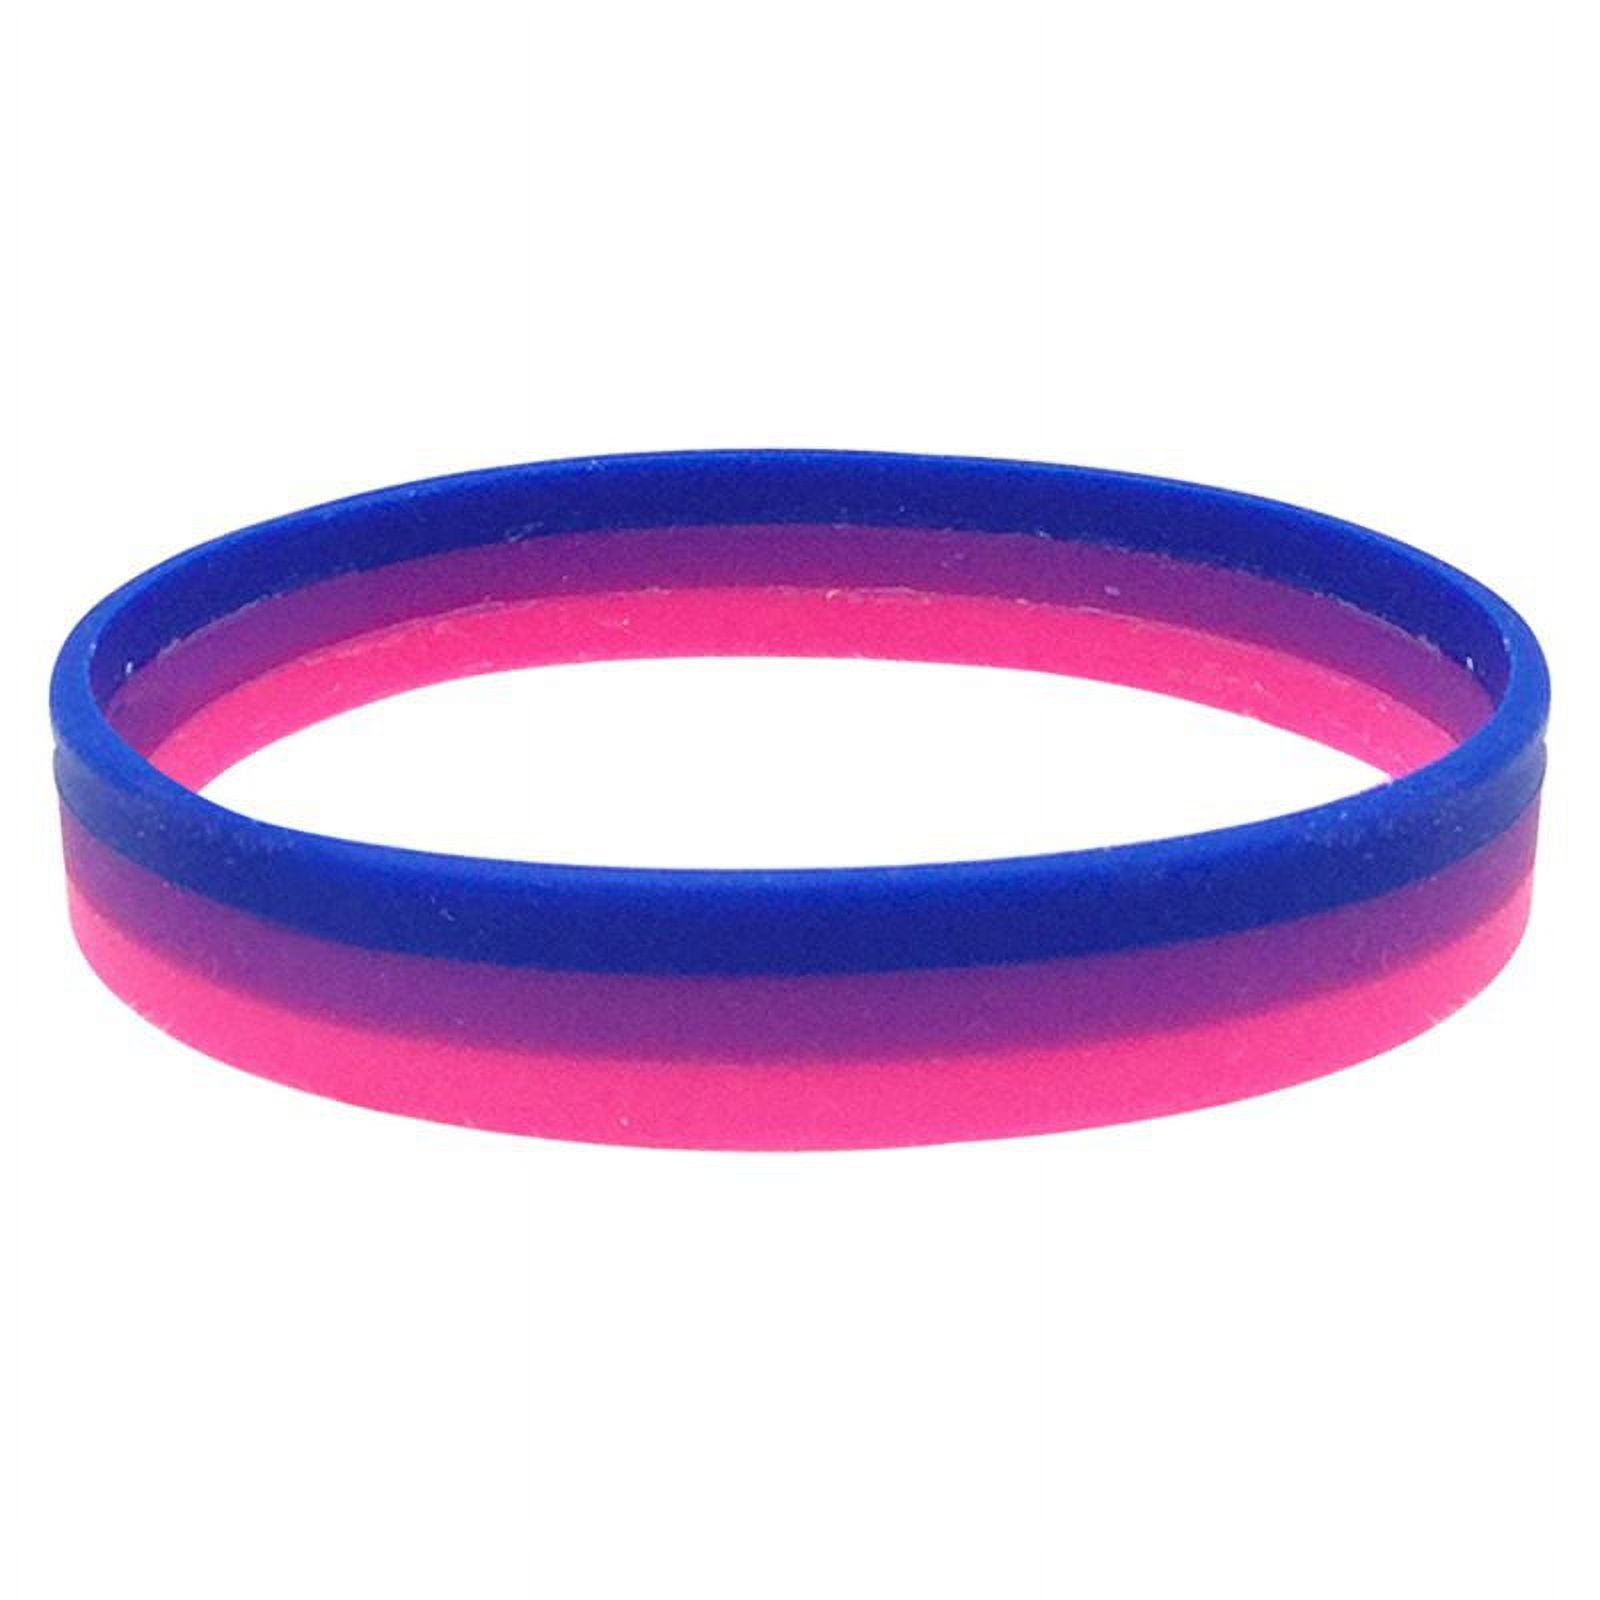 Buy 50 pcs Green Silicone Elastic Wristbands, Customizable Blank Rubber  Wrist Bands Wholesale Bulk Bracelets at Amazon.in